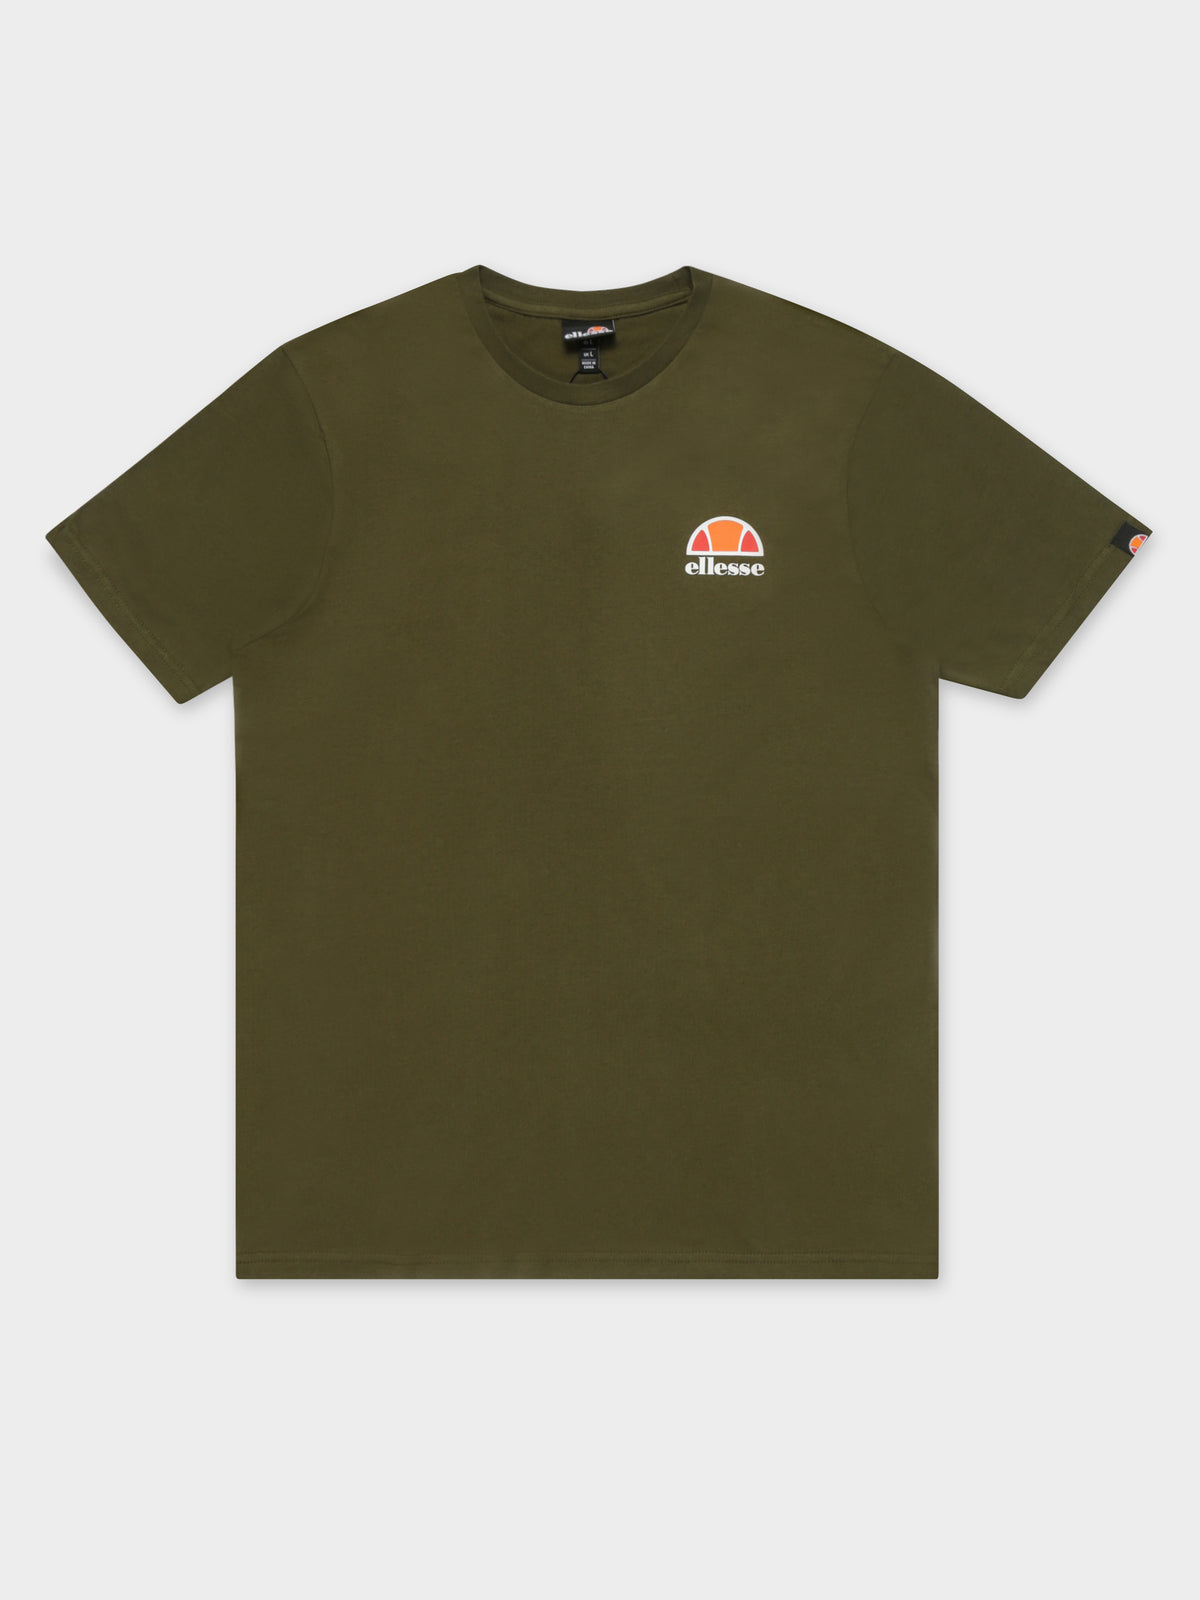 Canaletto T-Shirt in Khaki Green